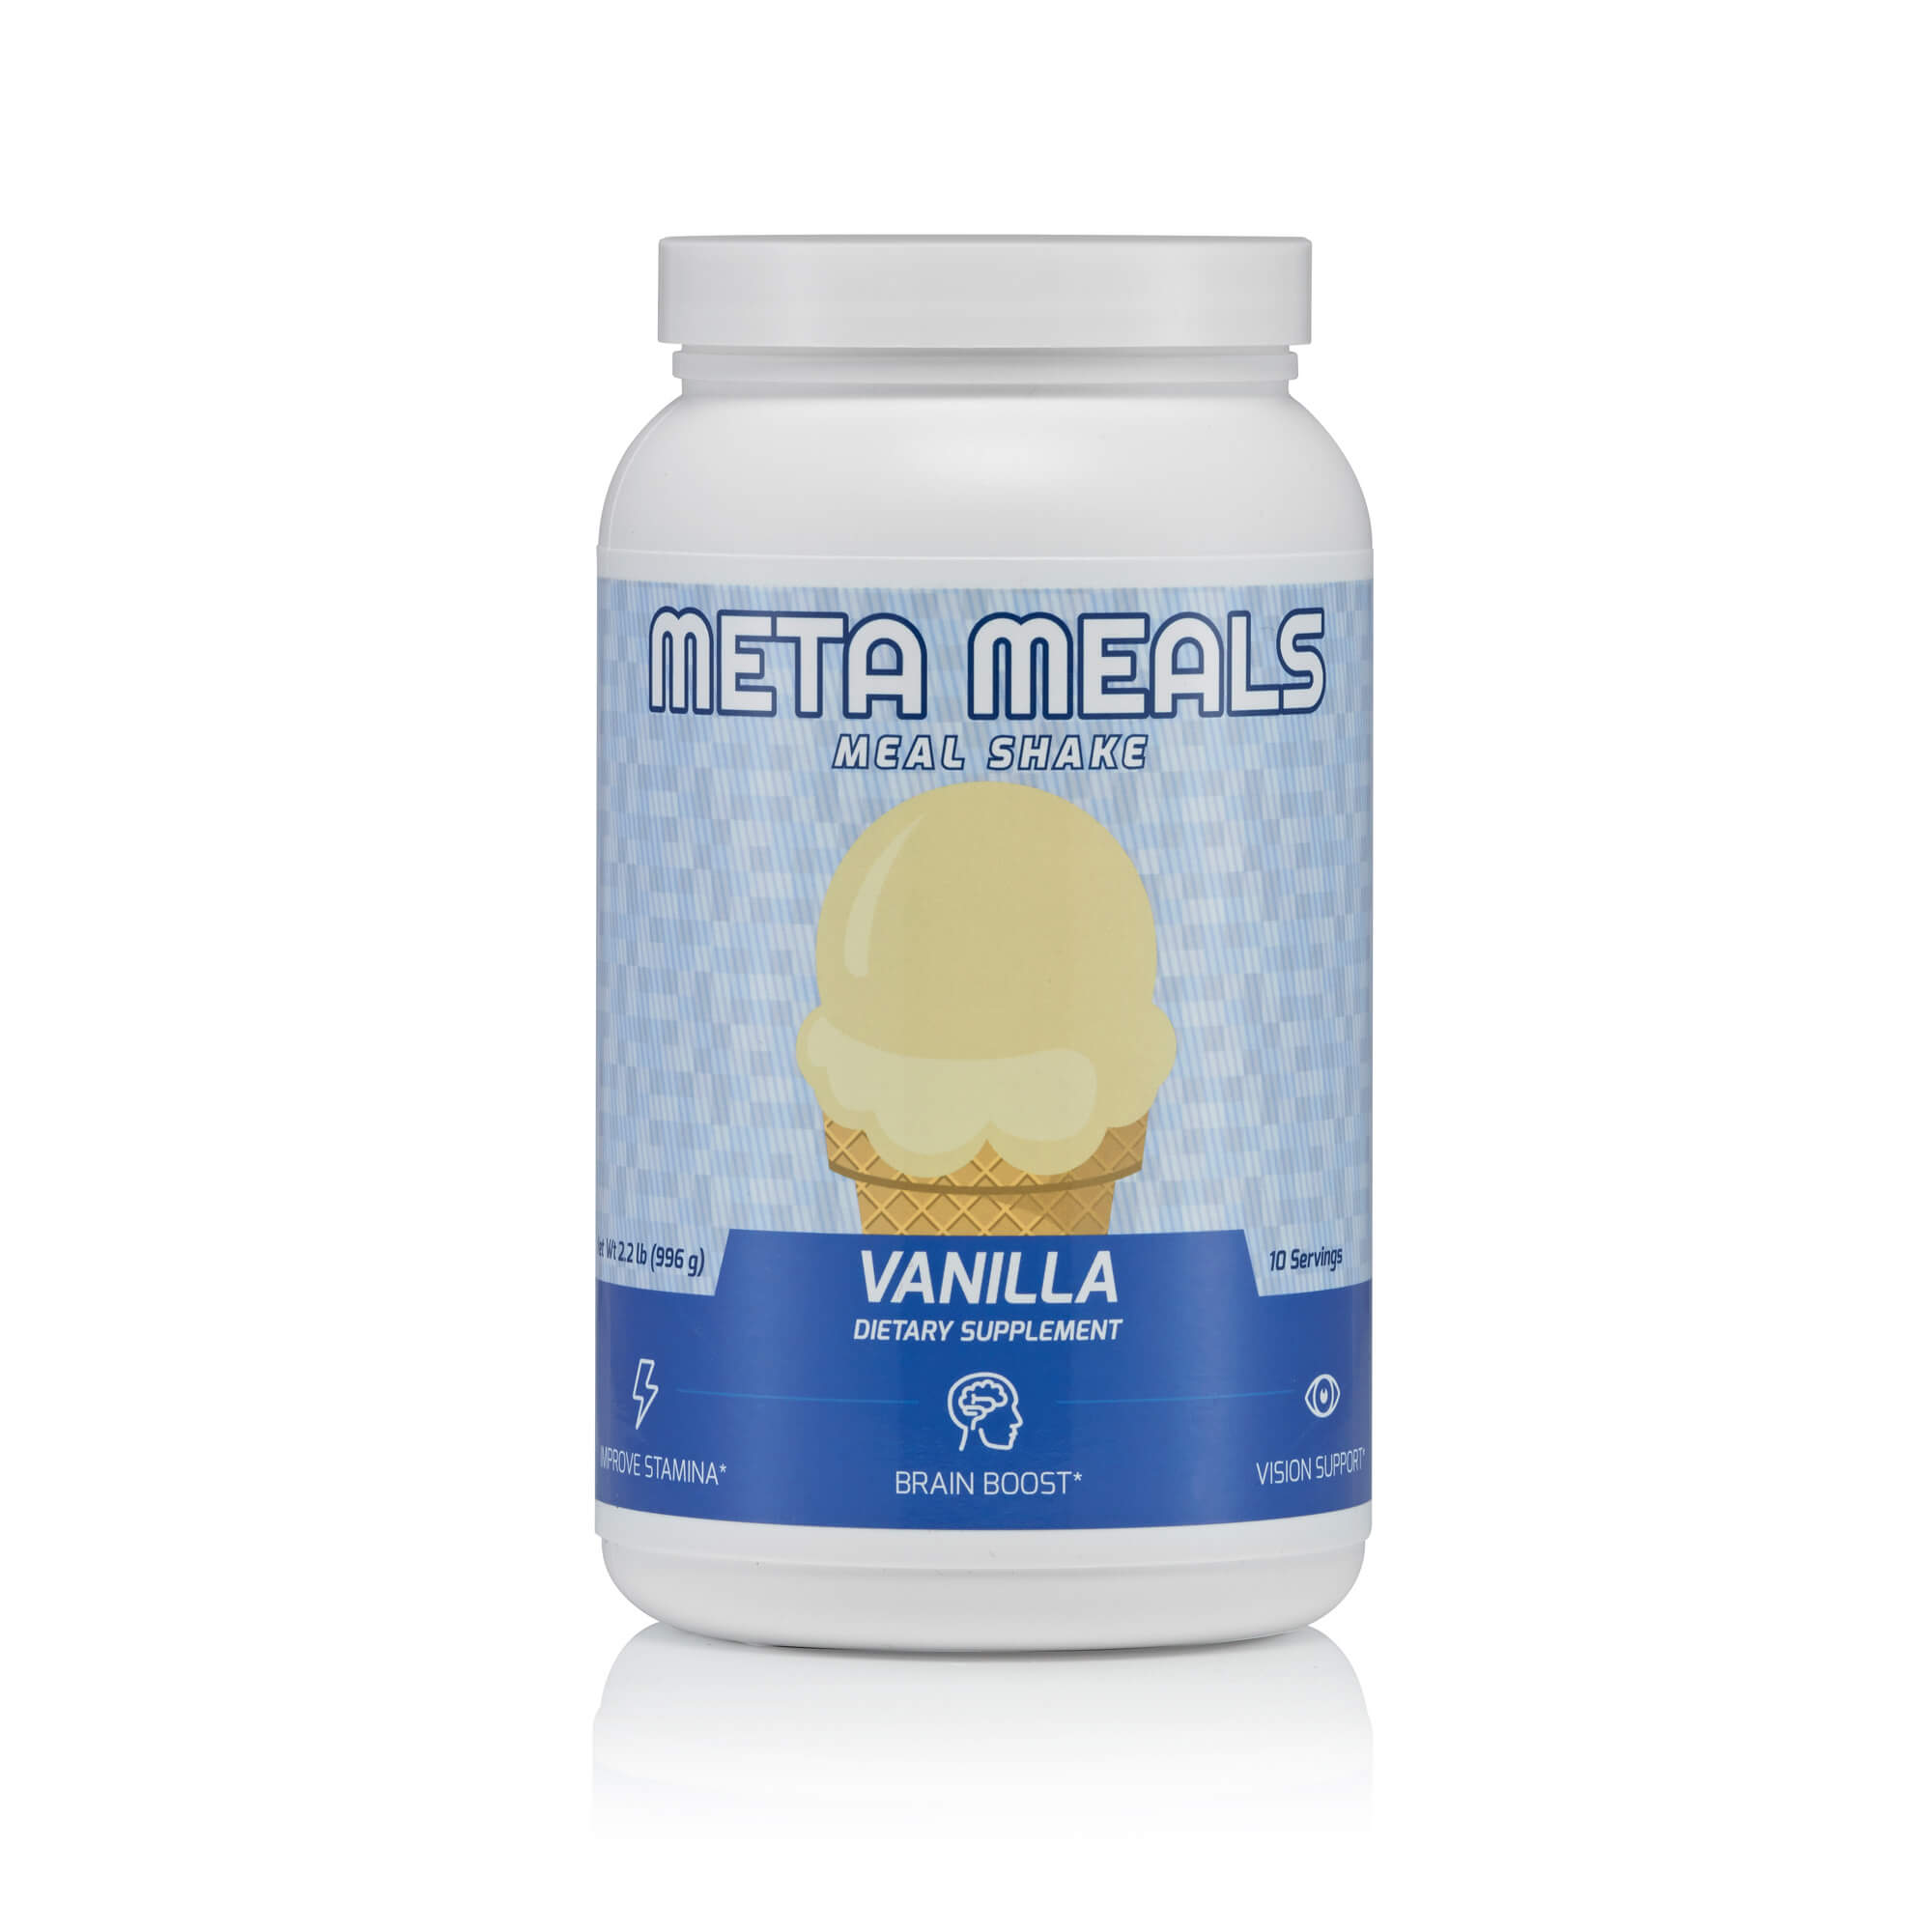 Vanilla meal replacement shake powder tub for gamers